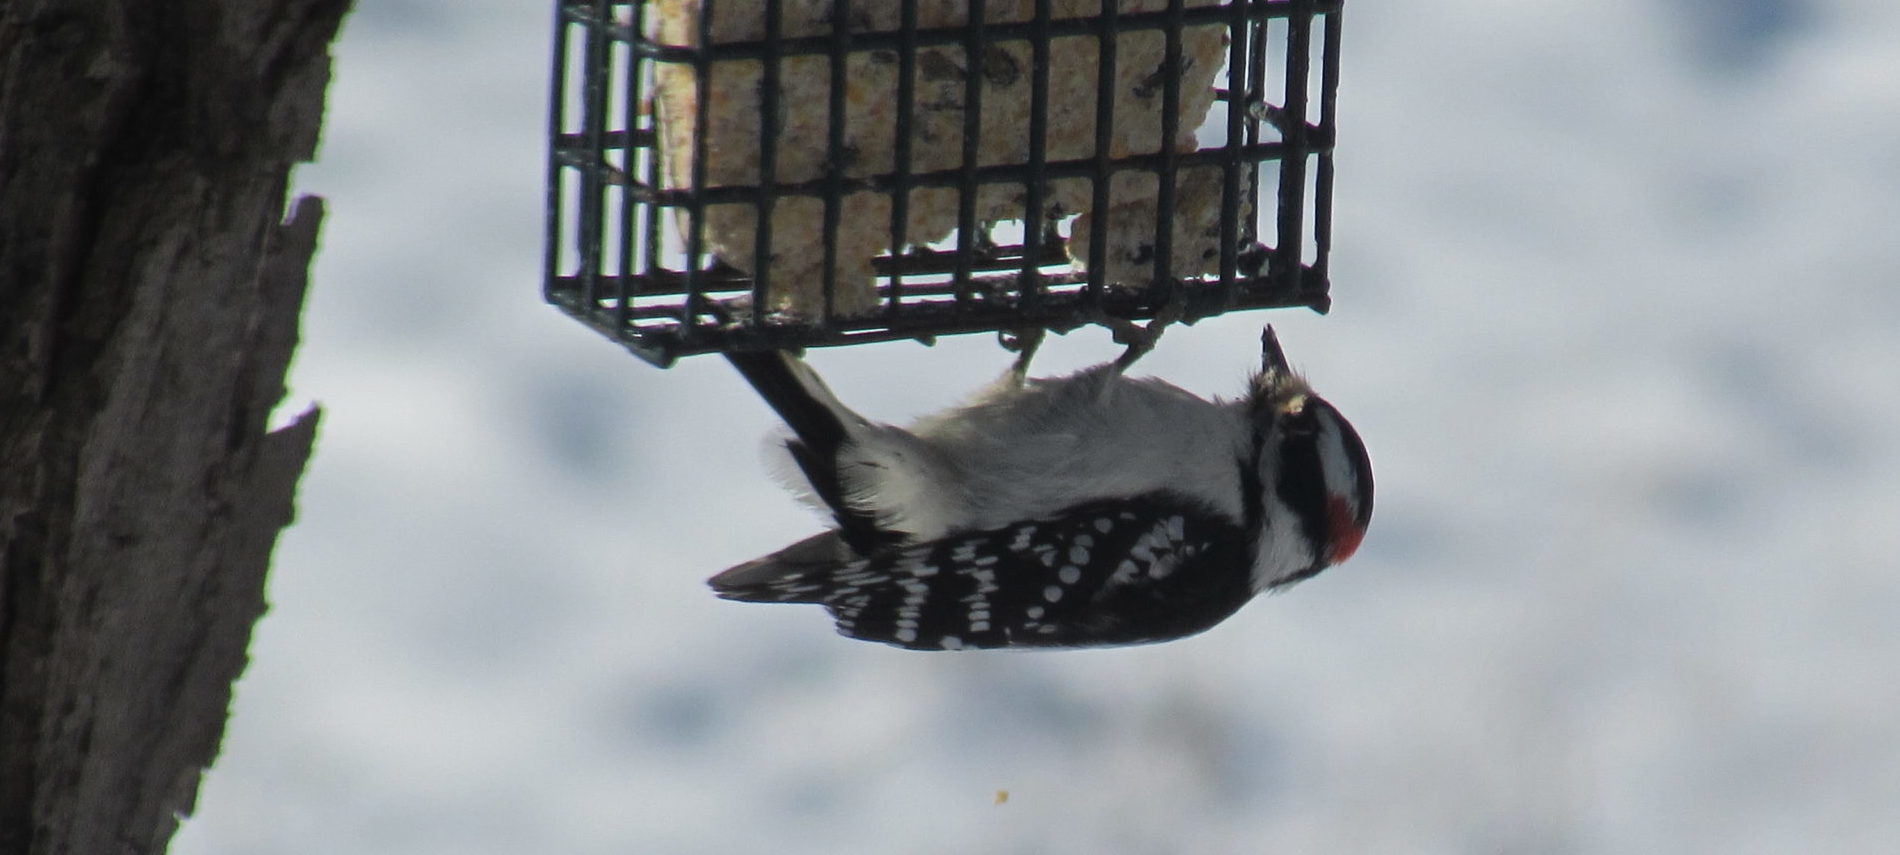 A black and white wood pecker in the snow upside down at a suet feeder.